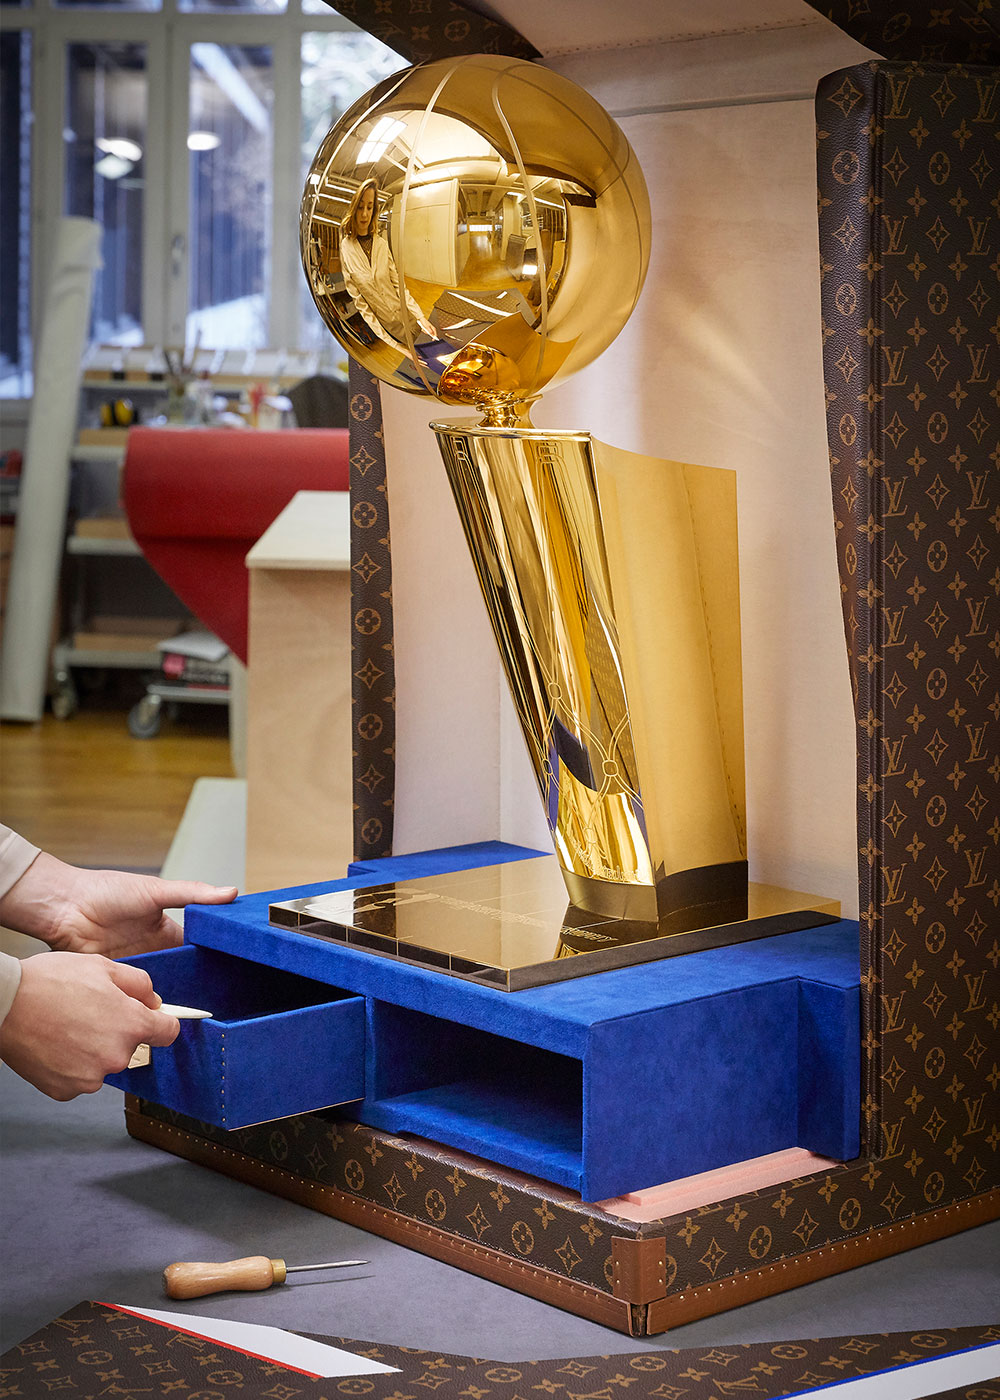 The World Cup Trophy Has Its Own Customised Louis Vuitton Case